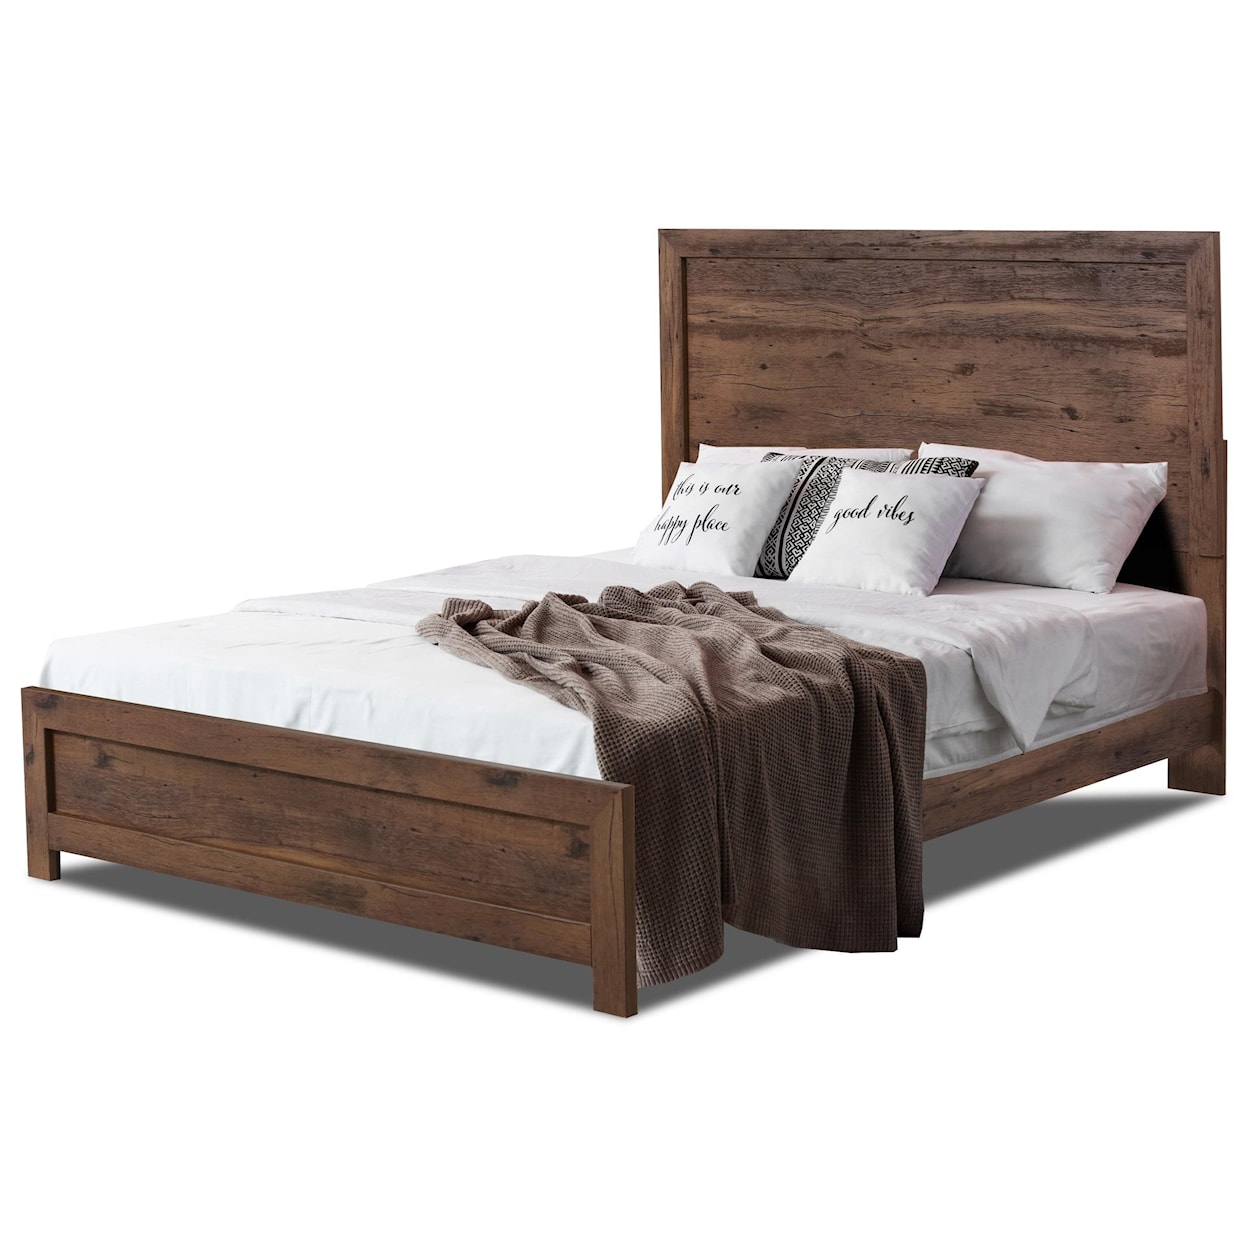 Kith Furniture Gilliam King Bed